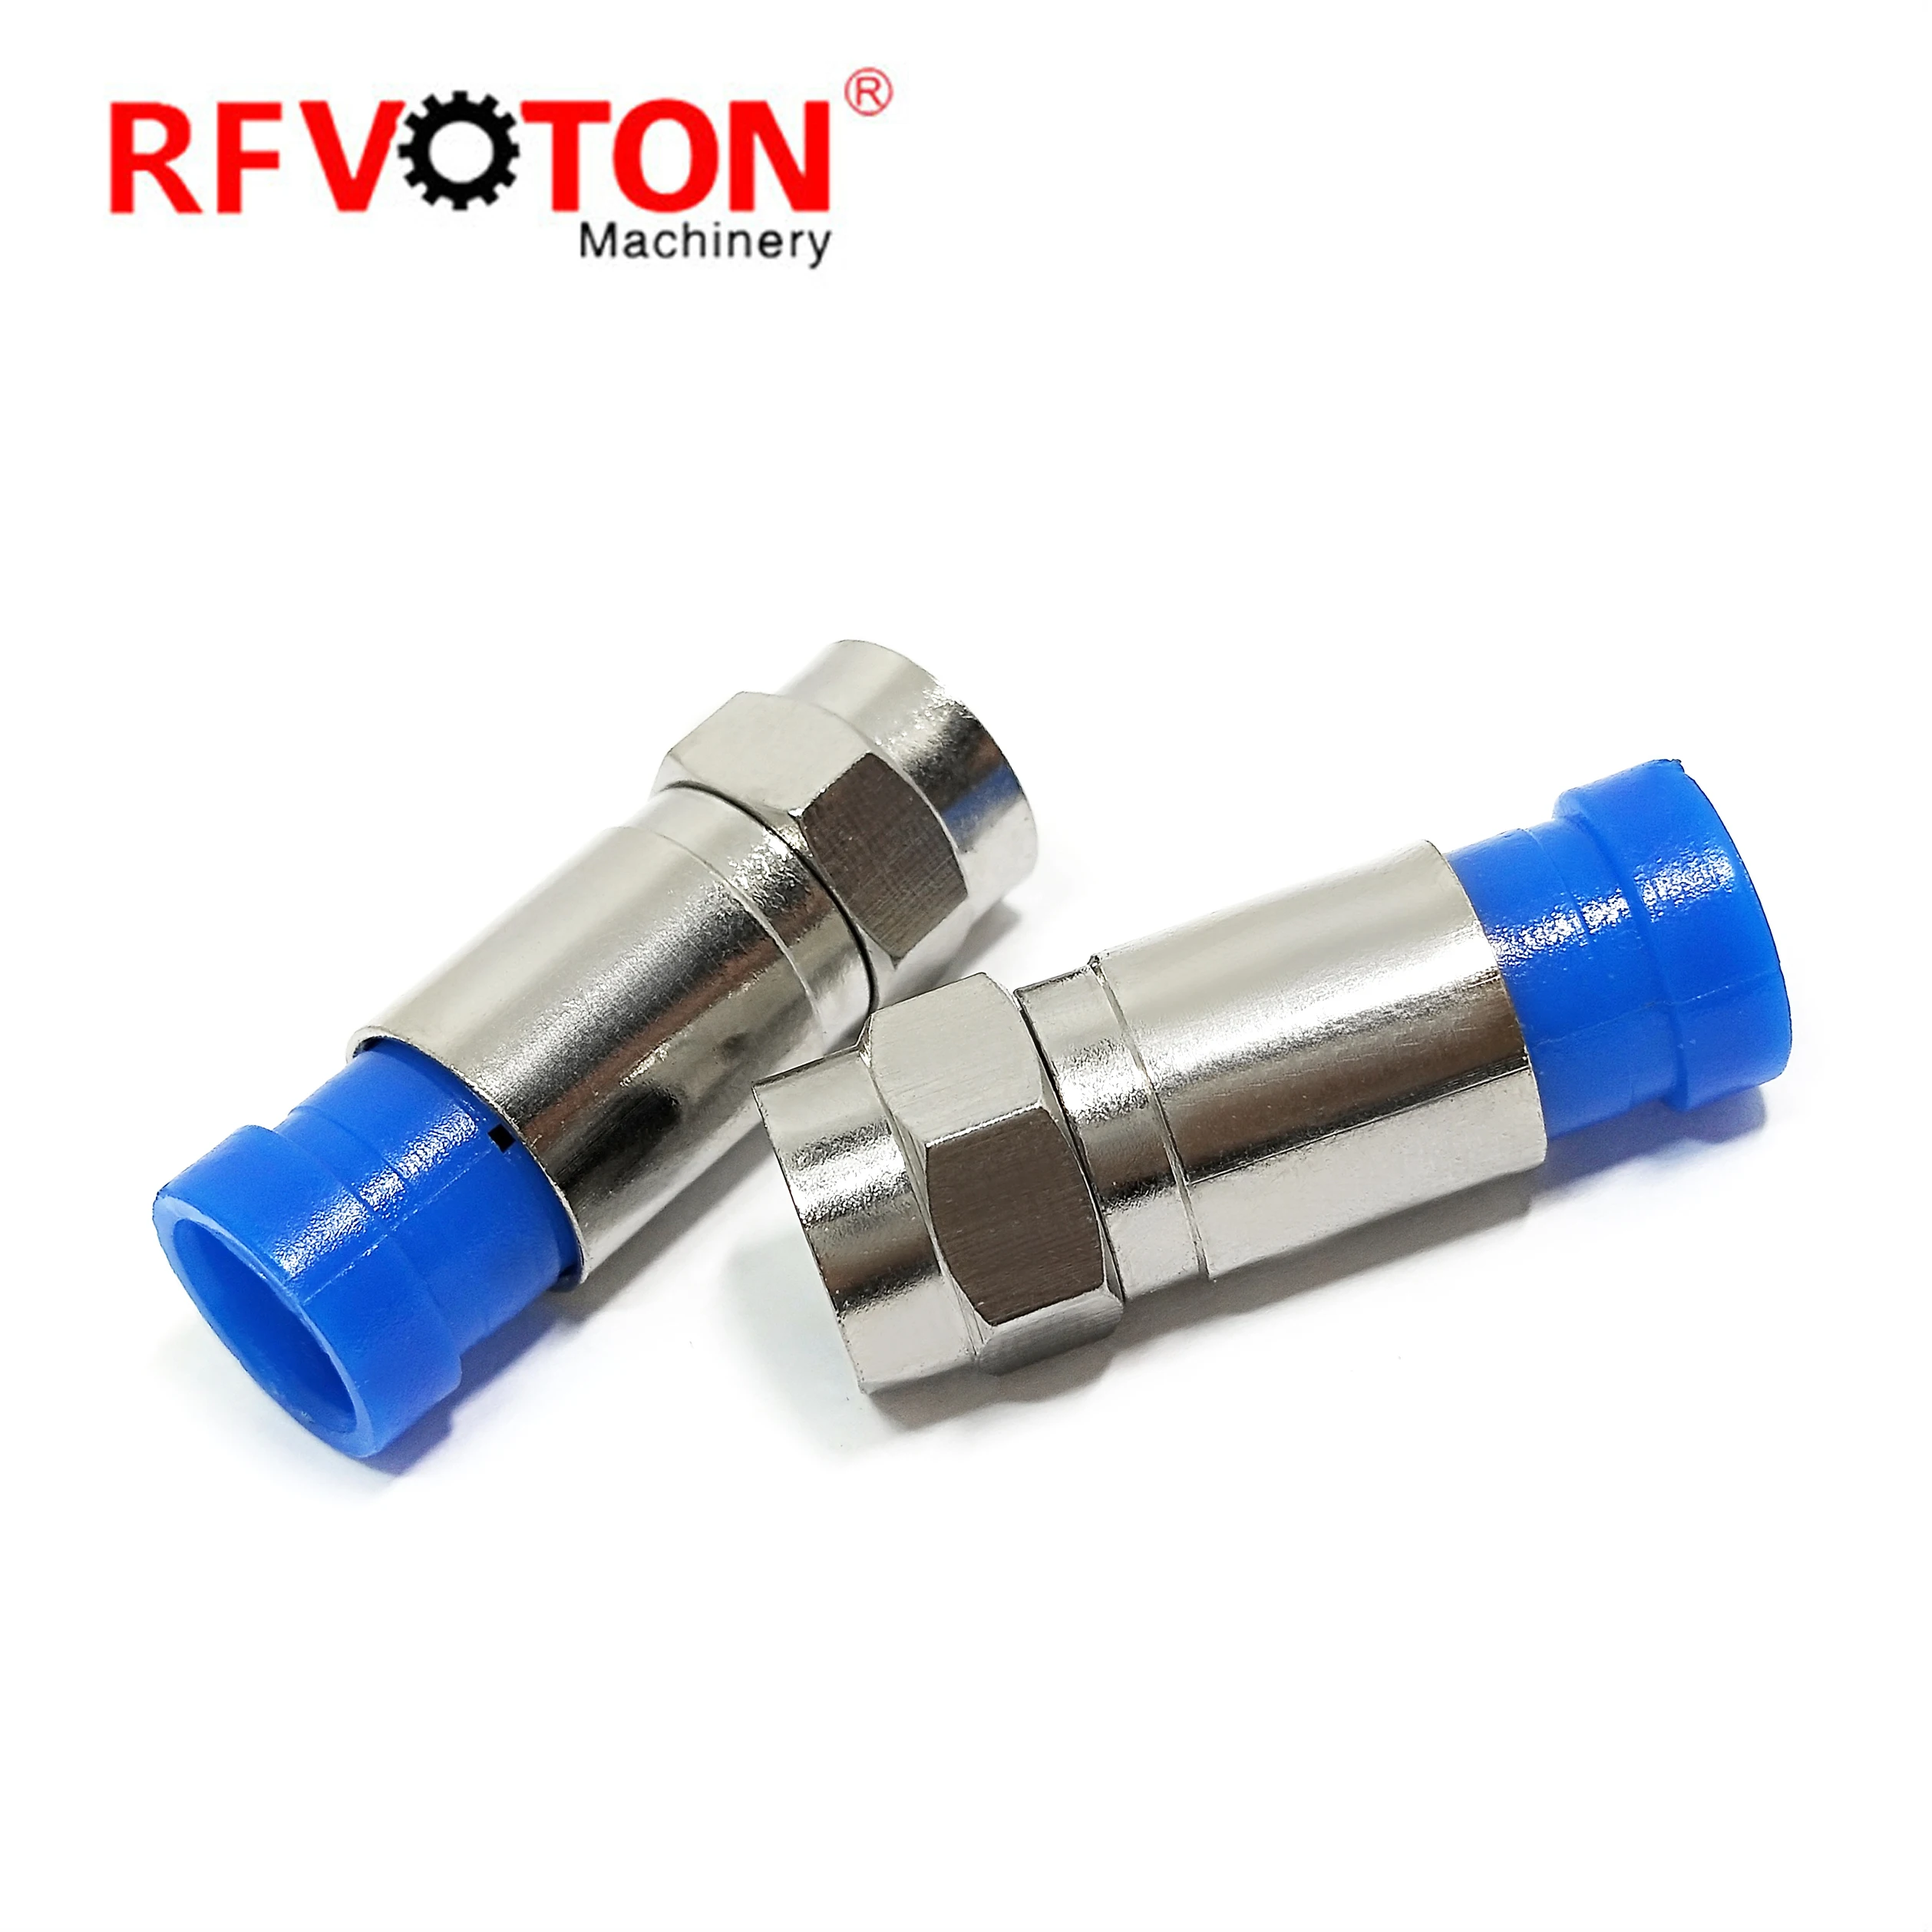 Factory supply low price F male plug straight compression rg6 cable rf coaxial connectors in stock supplier